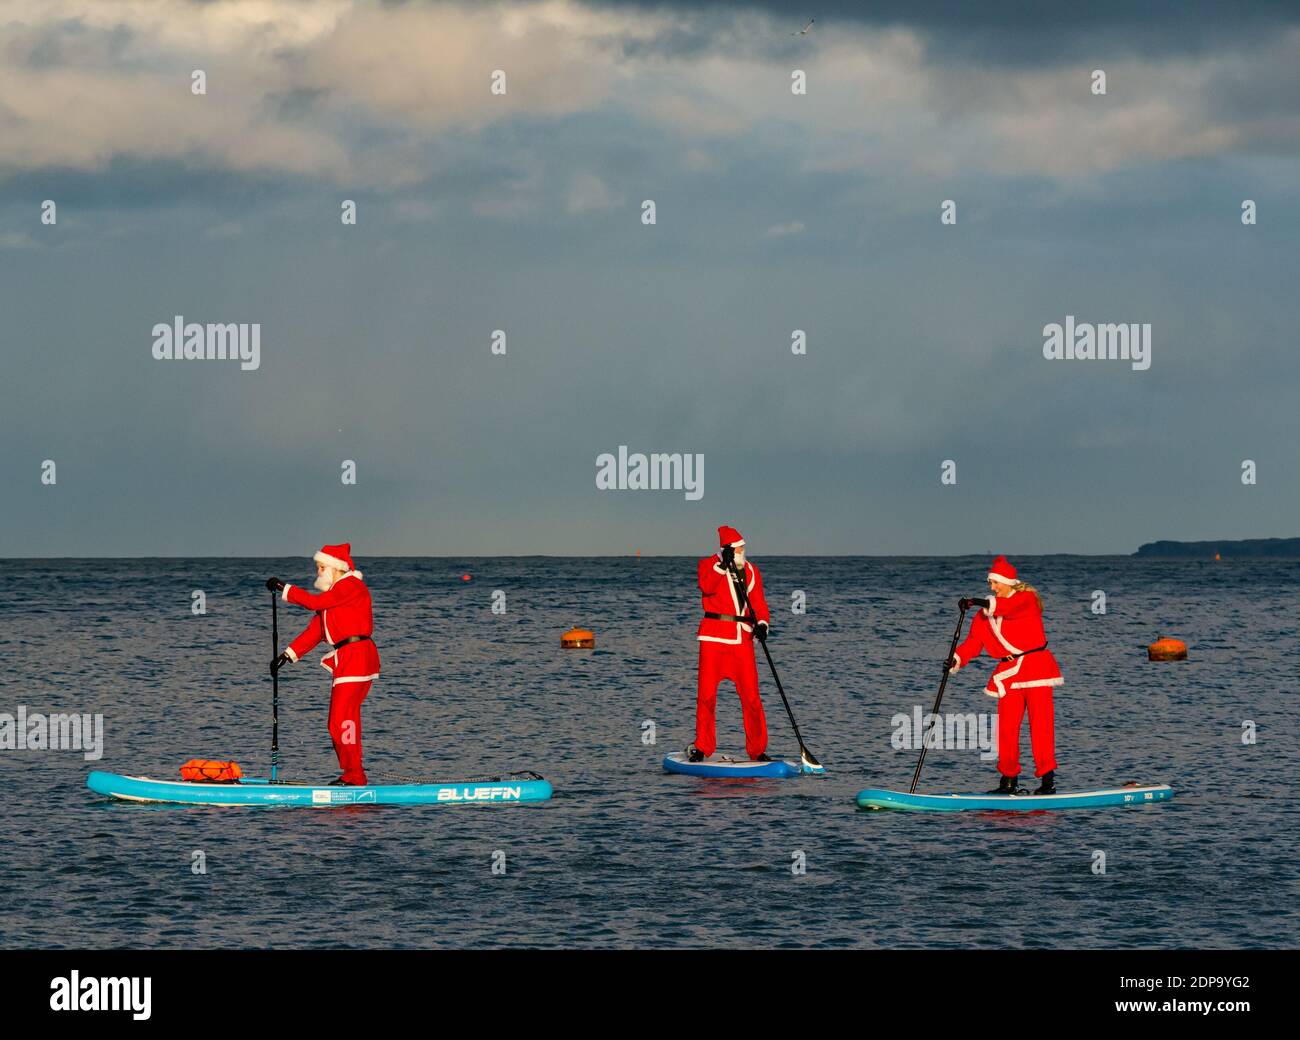 North Berwick, East Lothian, Scotland, United Kingdom, 19th December 2020. Paddle Boarding Santas for charity: a local community initiative by North Berwick News and Views called 'Christmas Cheer' raises over £5,000 funds for families in need. The paddle boarders are dressed in Santa costumes Stock Photo